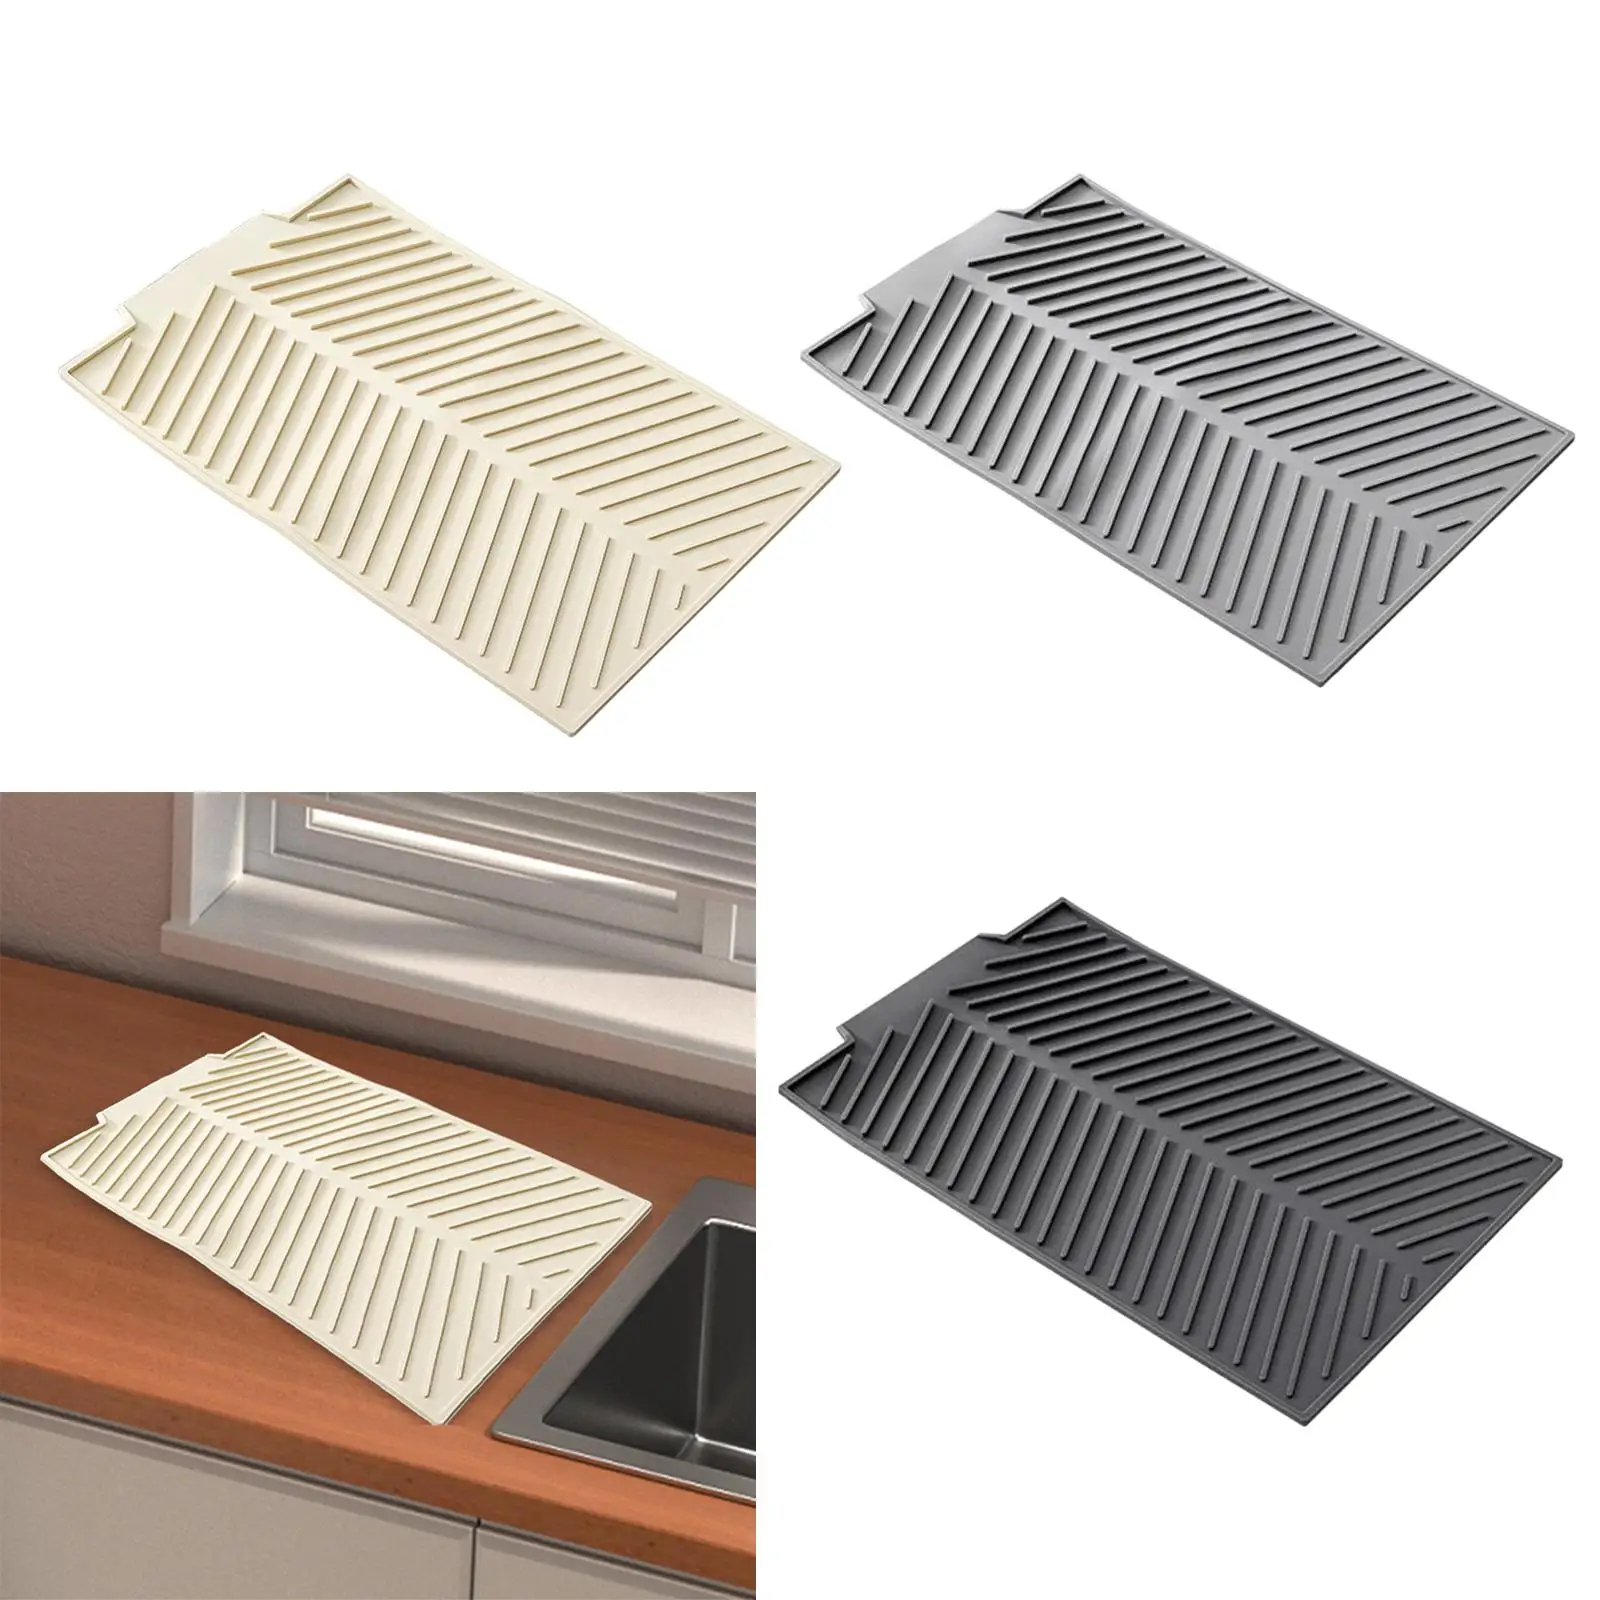 Draining Board Mat Heat Resistant Dish Drying Mat Flume Drain Board Drainer Mat for Dining Table Kitchen Bathroom Dishes 35x25cm